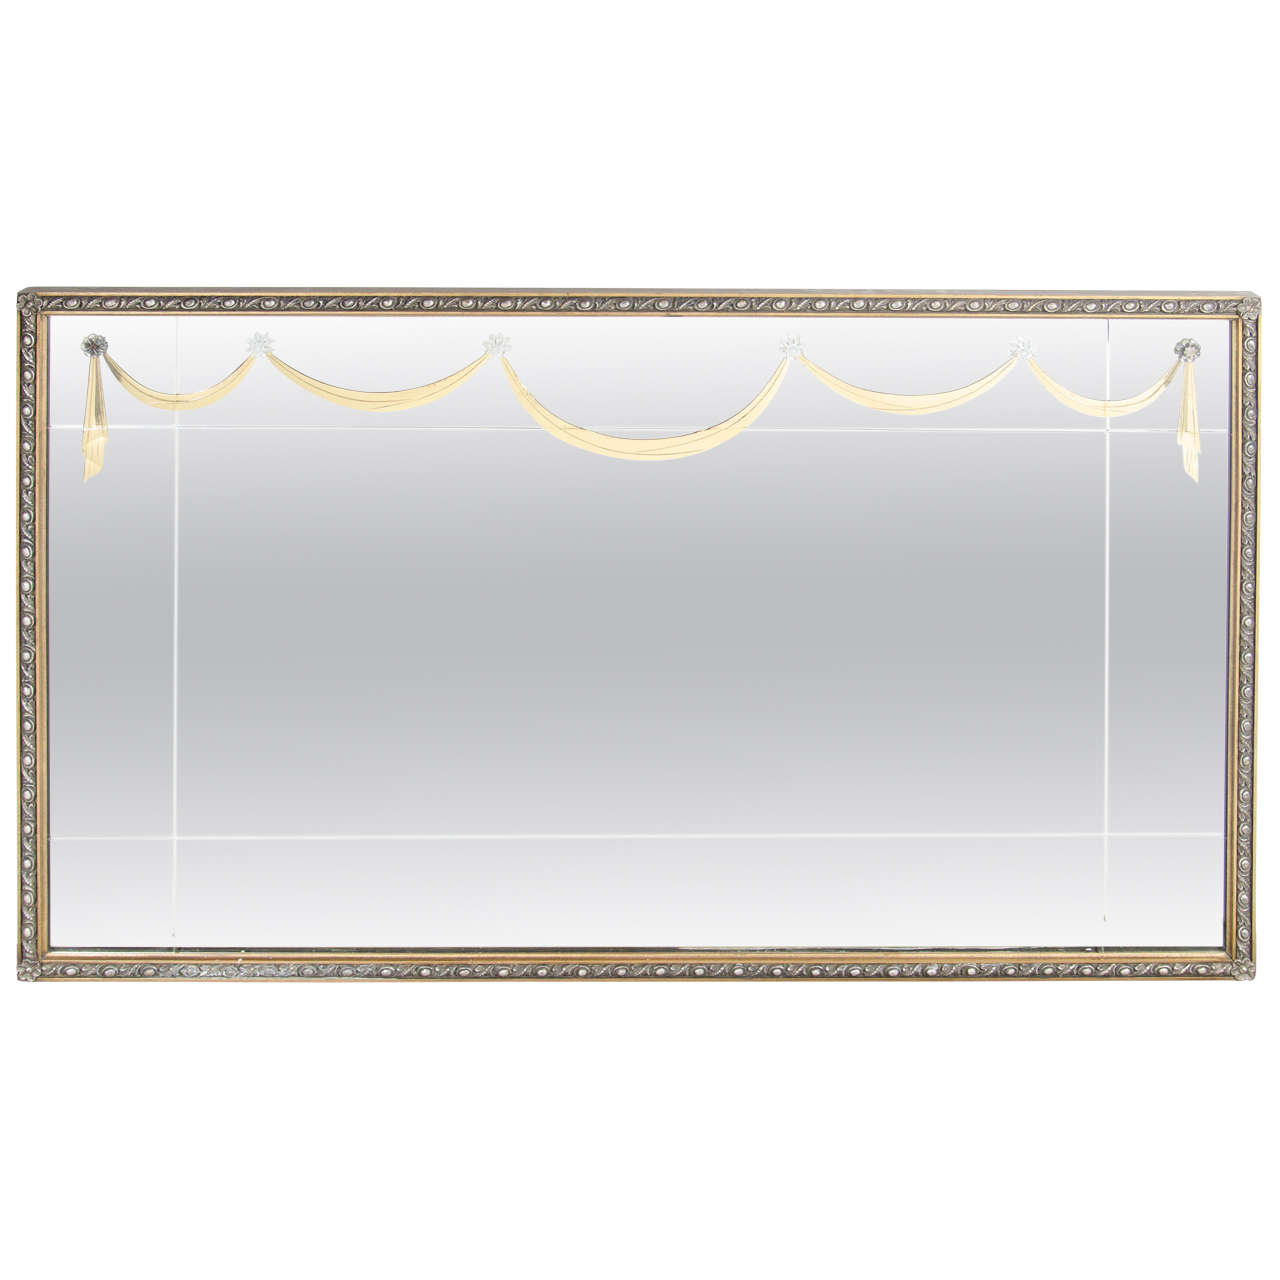 1940s Gilt Mirror with Neoclassical Motifs & Lucite Appliqués by Grosfeld House For Sale